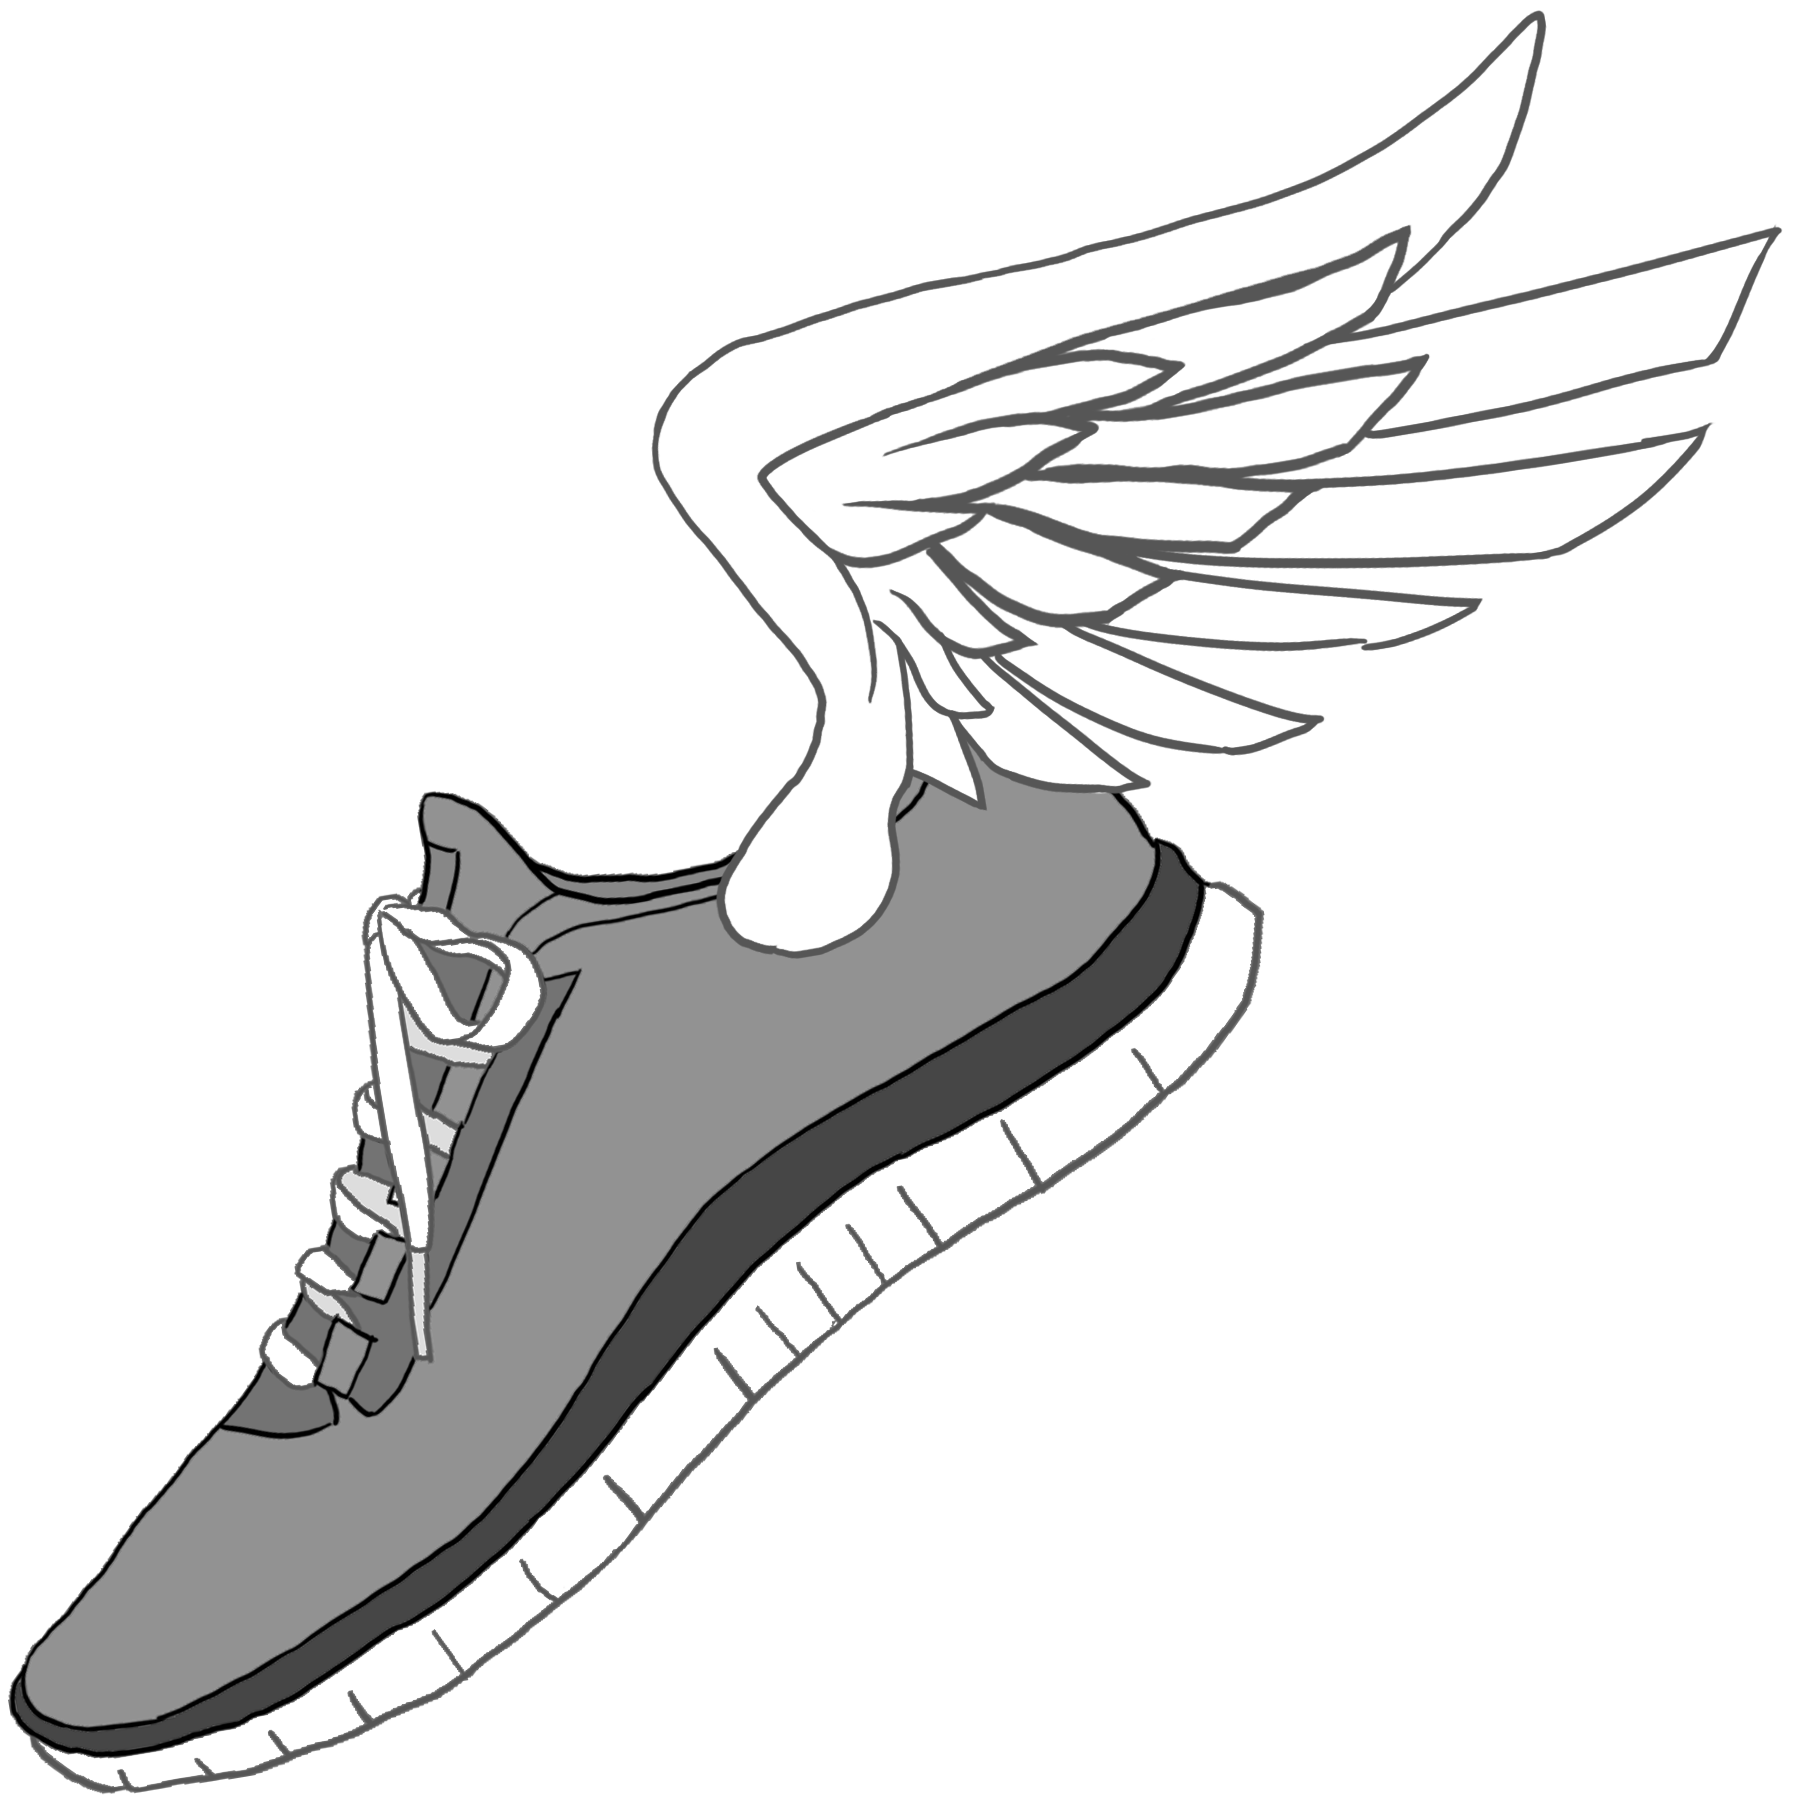 Cross country running shoes clipart danasrho top 2 image #31865